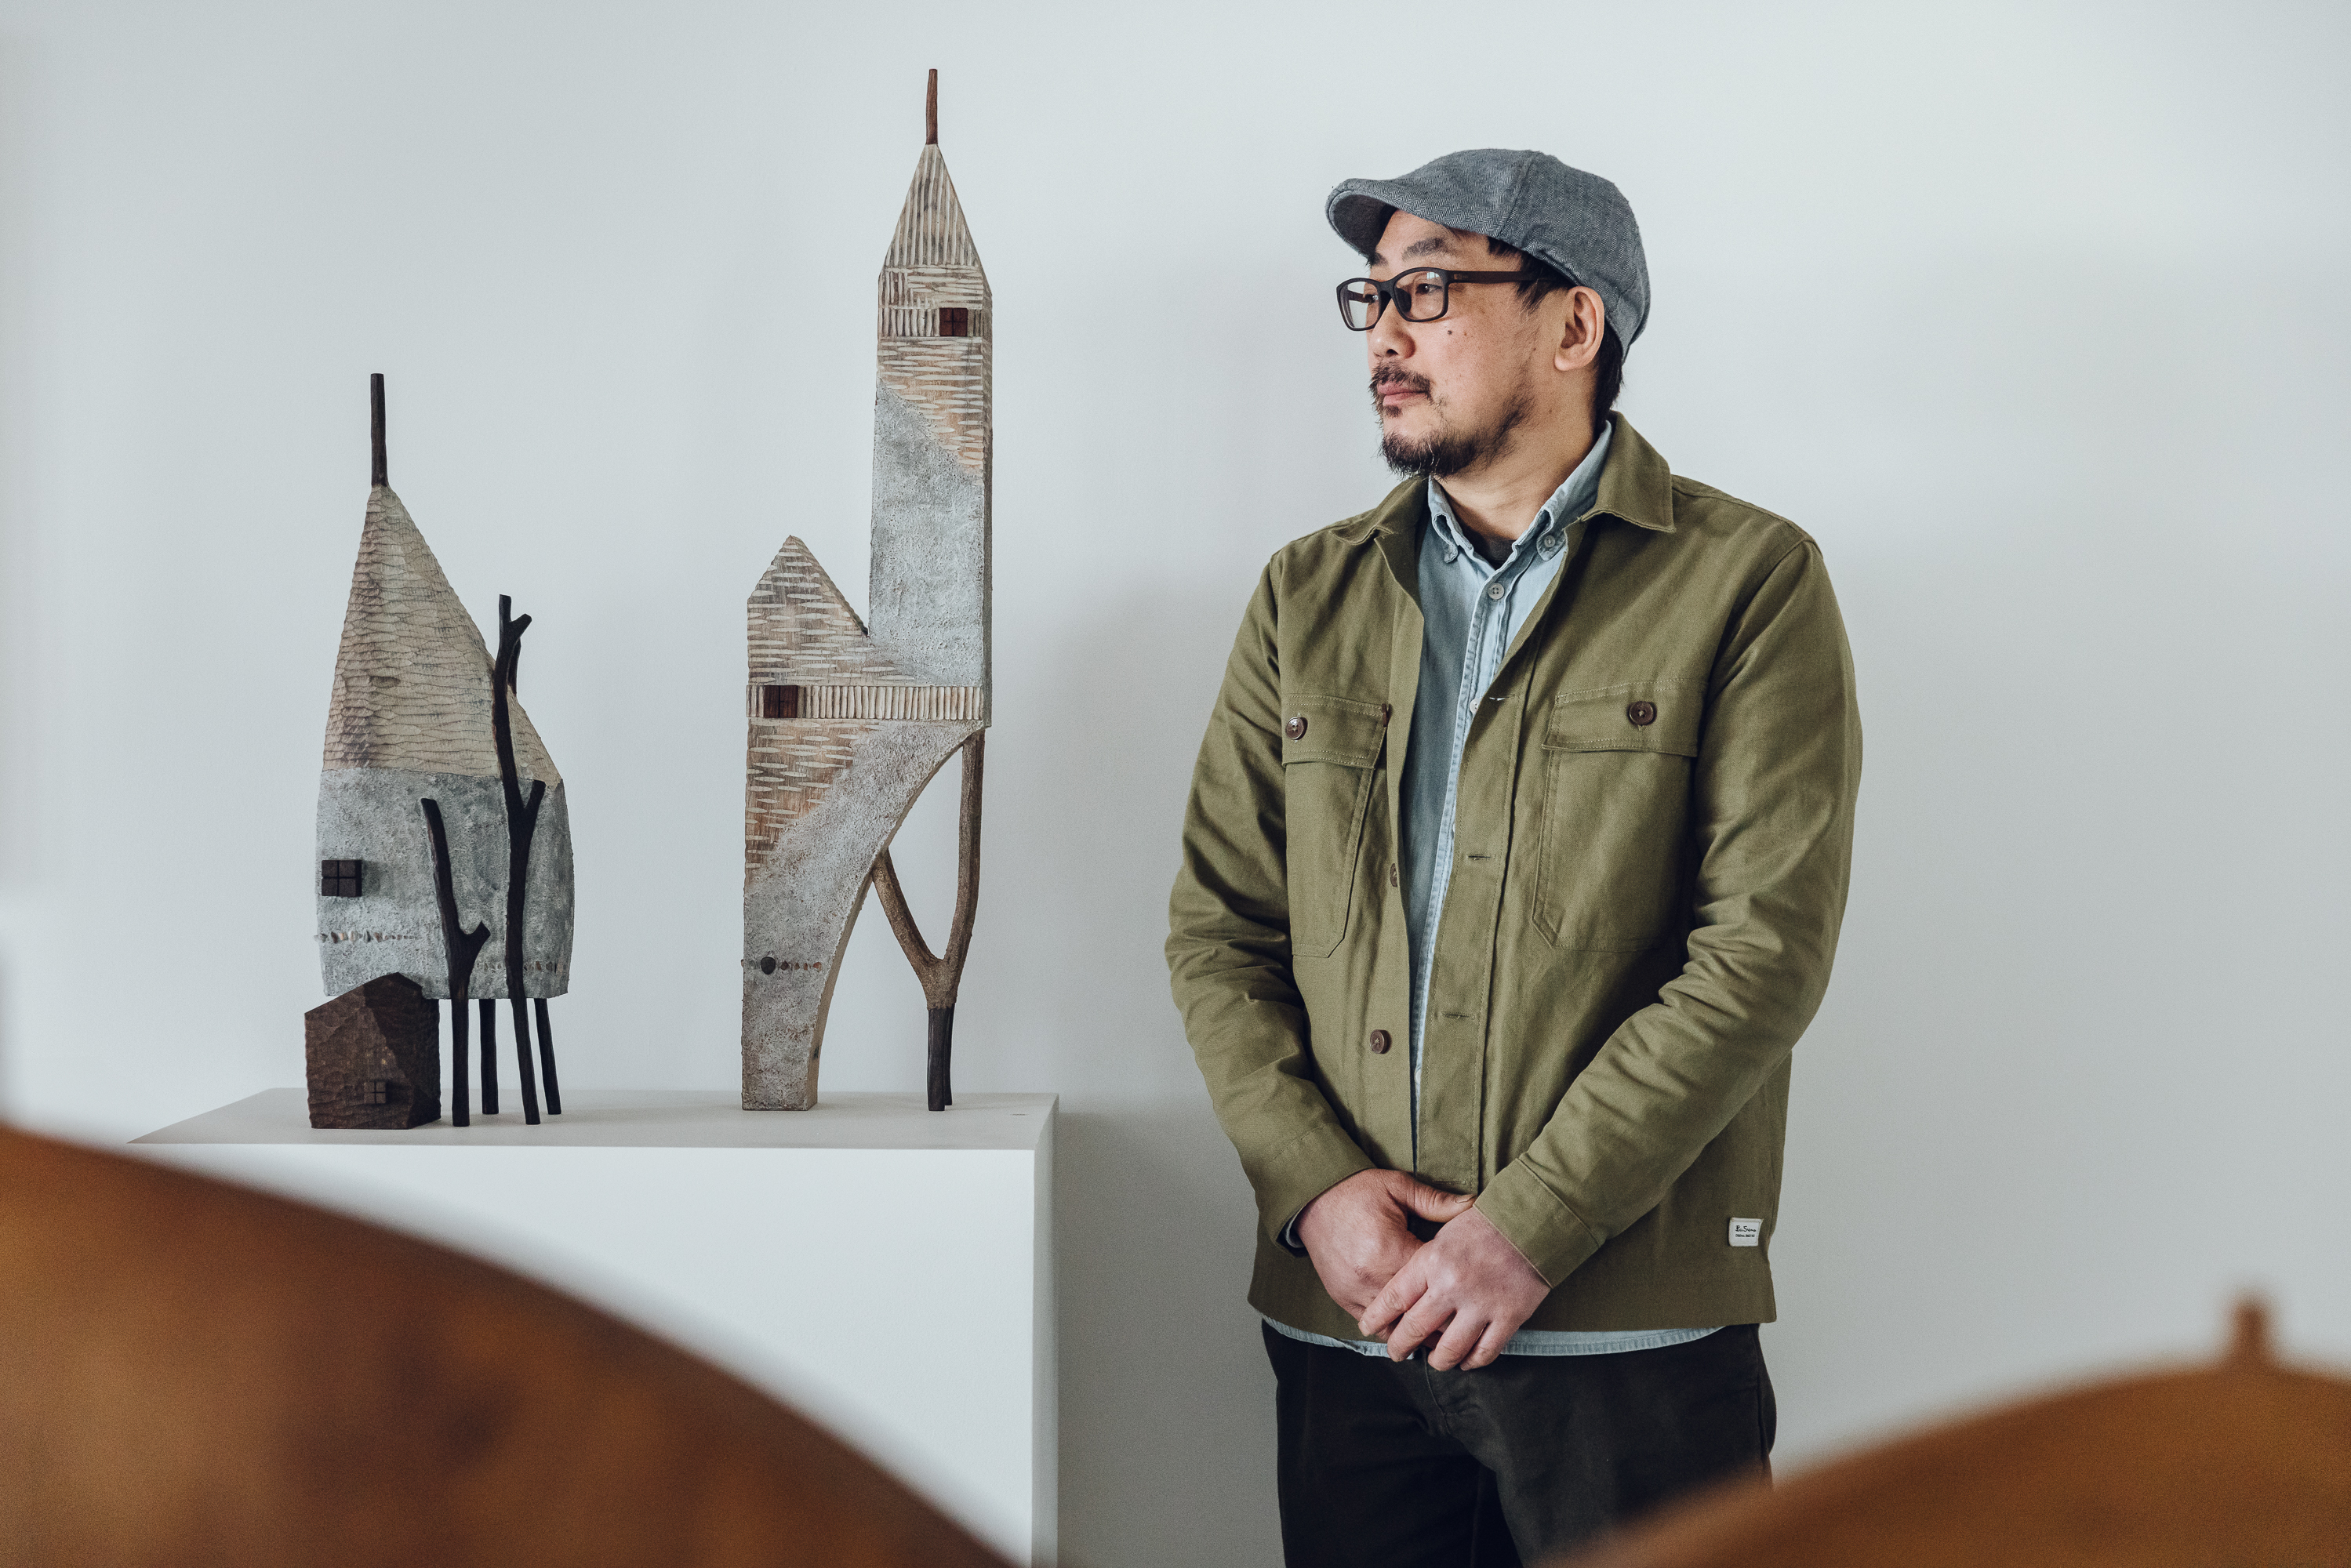 The artist Yukihiro Akama, a Japanese man wearing a green jacket and grey cap, standing next to two carved wooden houses.